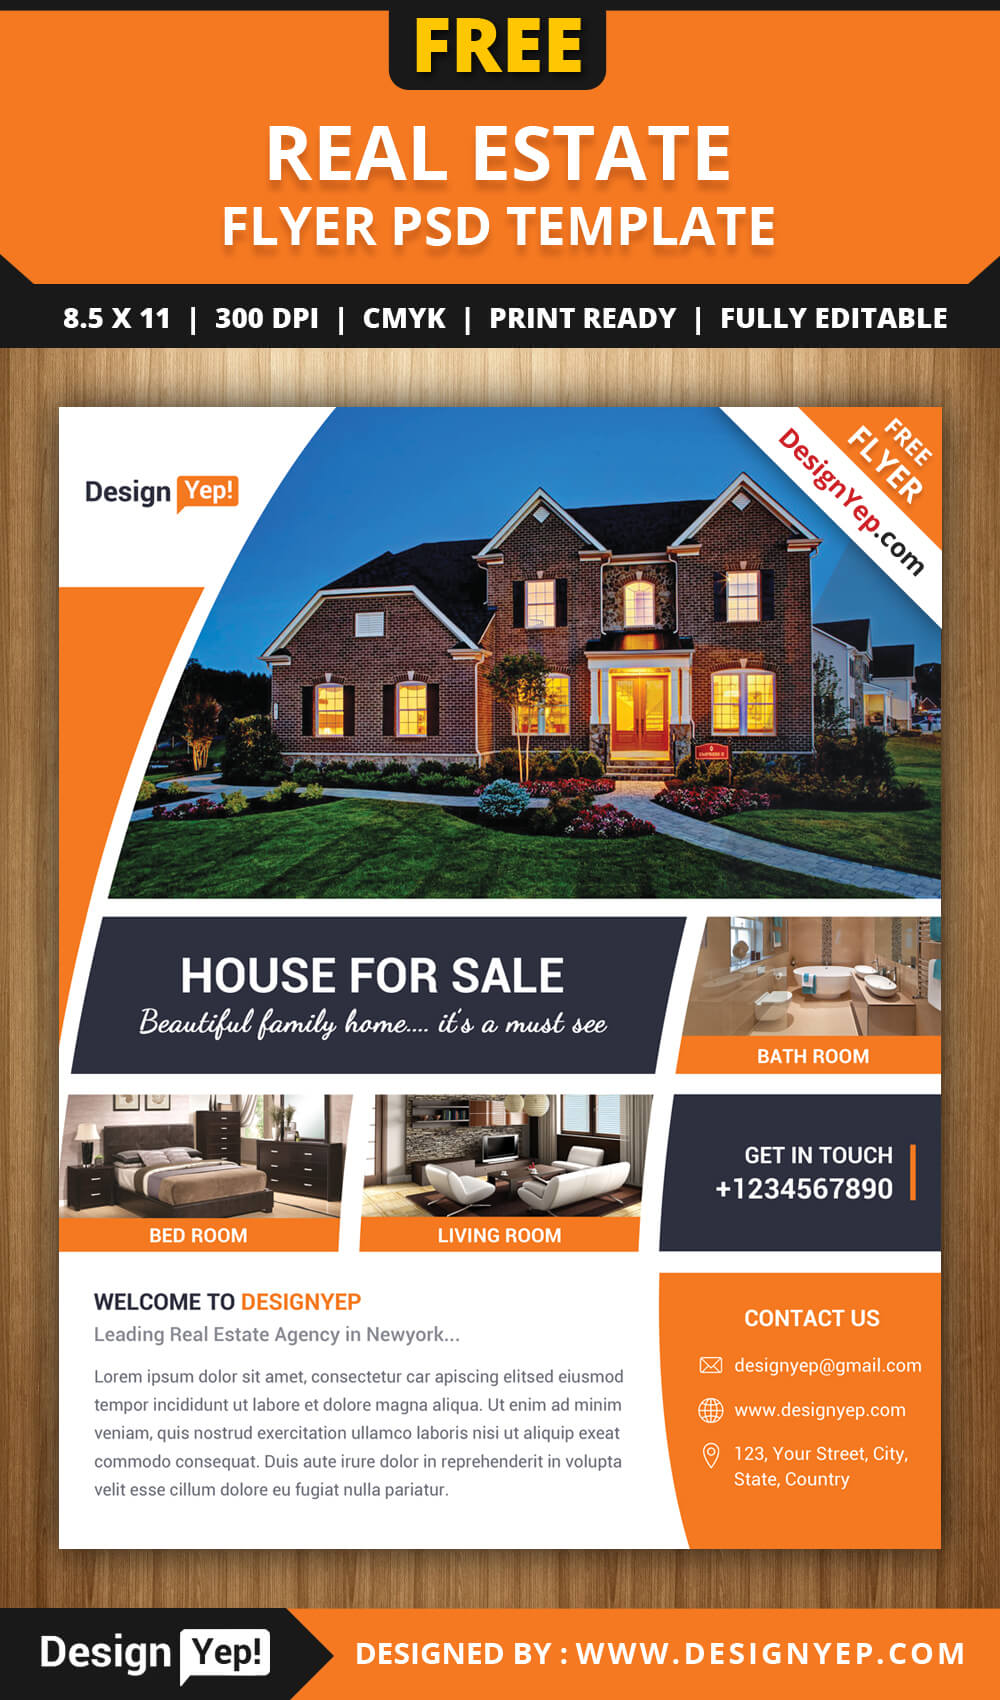 Free Real Estate Flyer Psd Template – Designyep With Regard To Real Estate Brochure Templates Psd Free Download